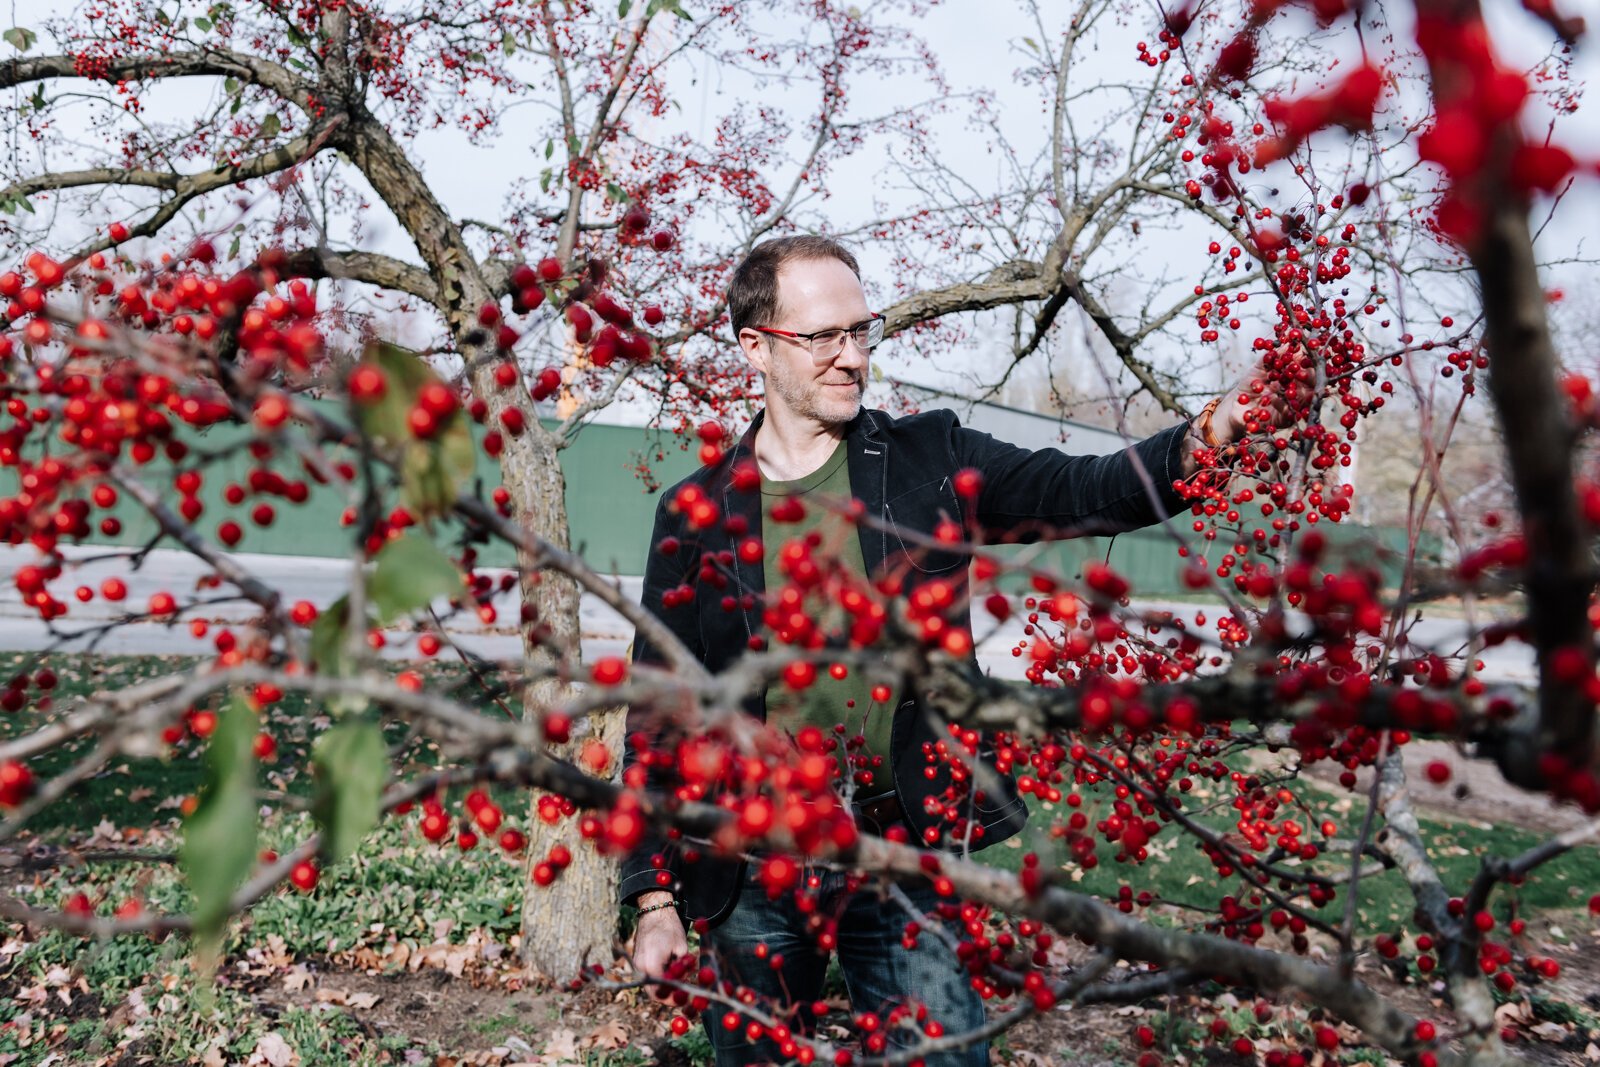 Michael Hoag forages for edible plants and fruit including crab apples at Foster Park in Fort Wayne.